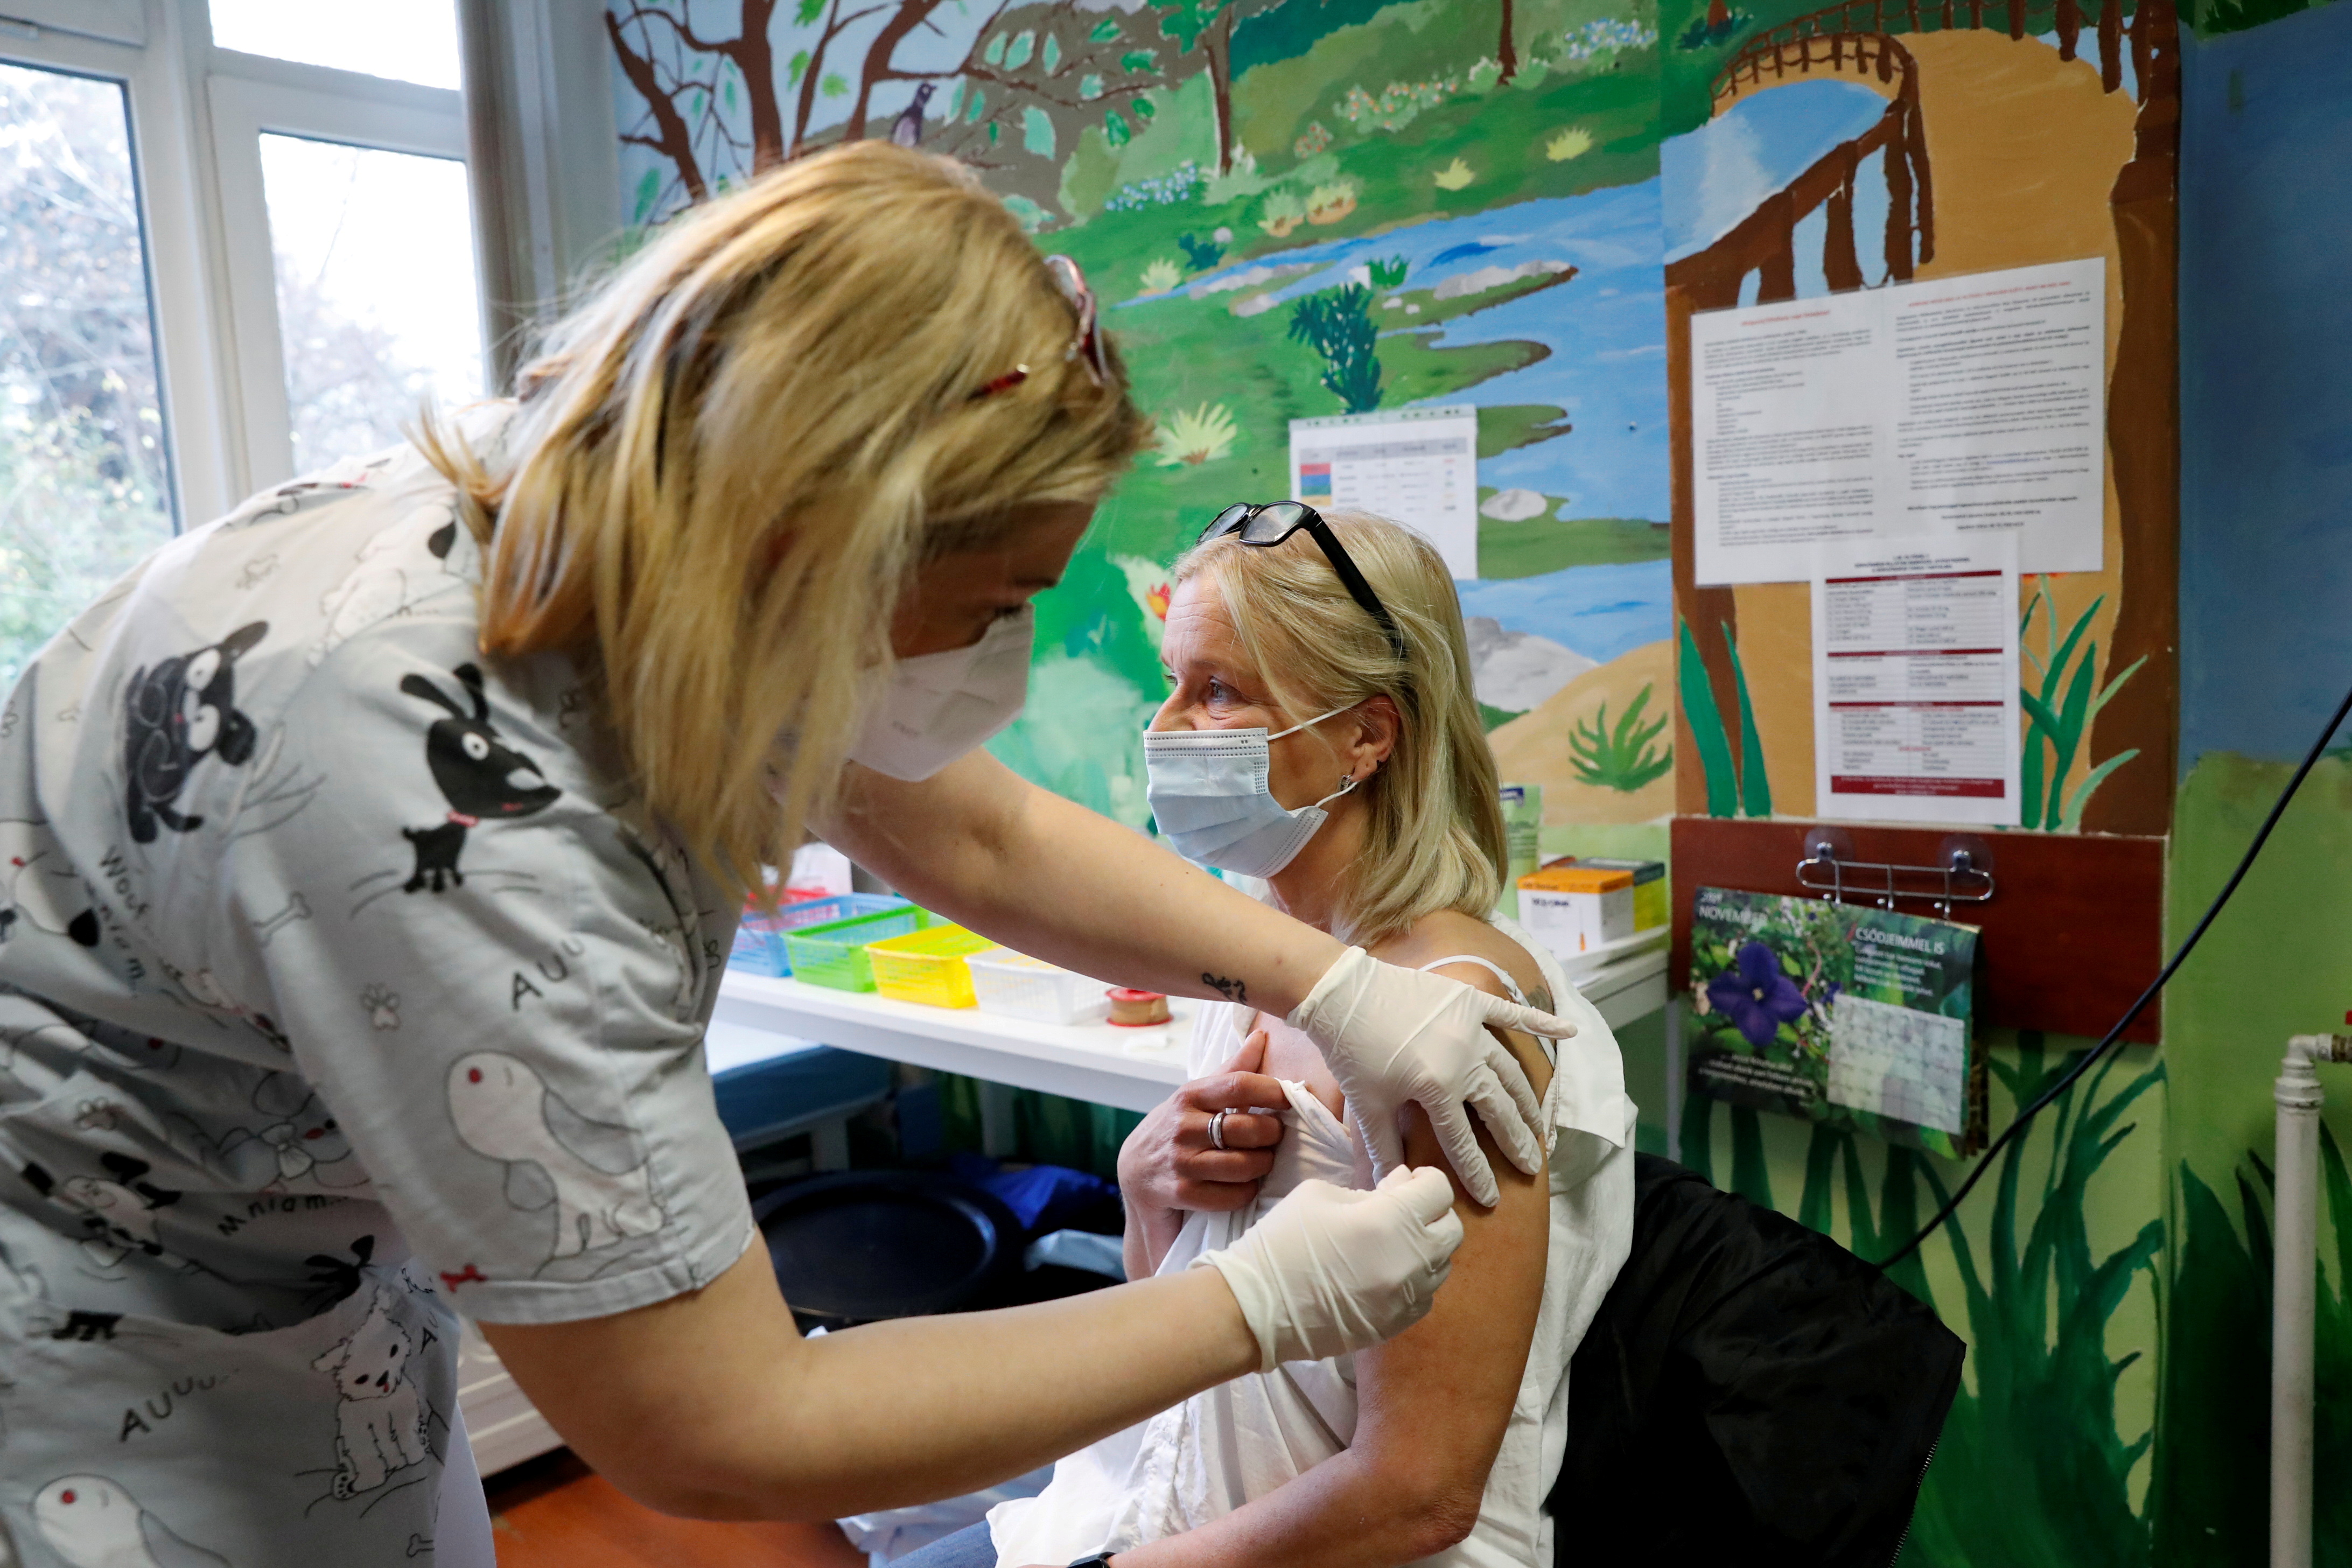 A nurse gives a dose of the Pfizer-BioNTech vaccine to a patient at the Bethesda Children's Hospital as the spread of the coronavirus disease (COVID-19) continues, in Budapest, Hungary, November 23, 2021. REUTERS/Bernadett Szabo/File Photo